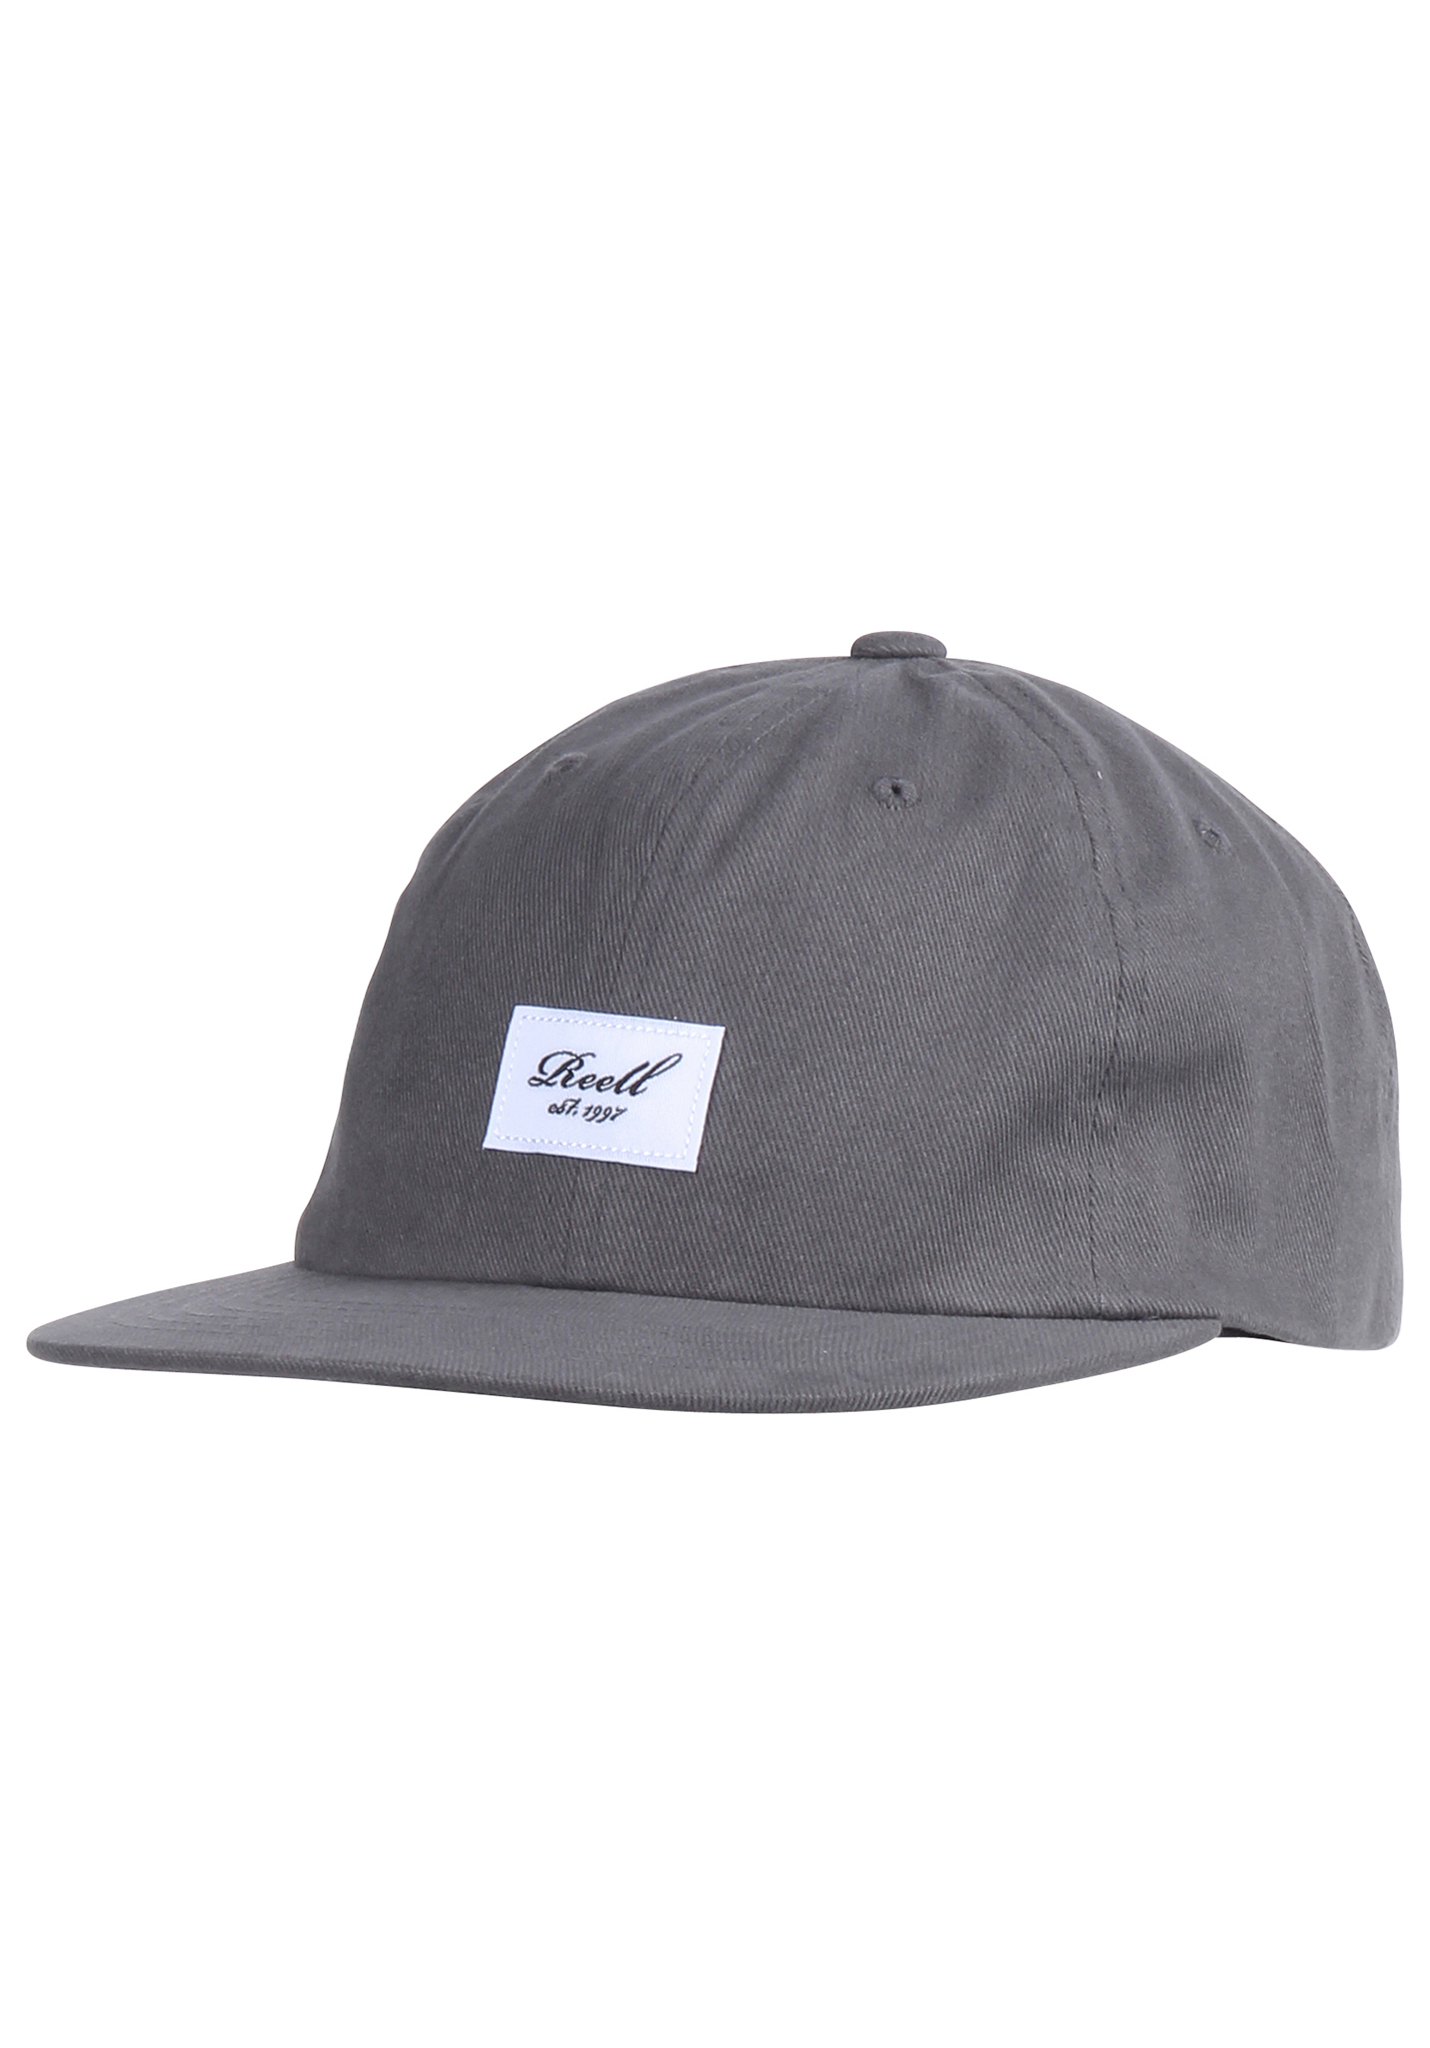 Reell Flat 6-Panel Snapback Cap charcoal One Size